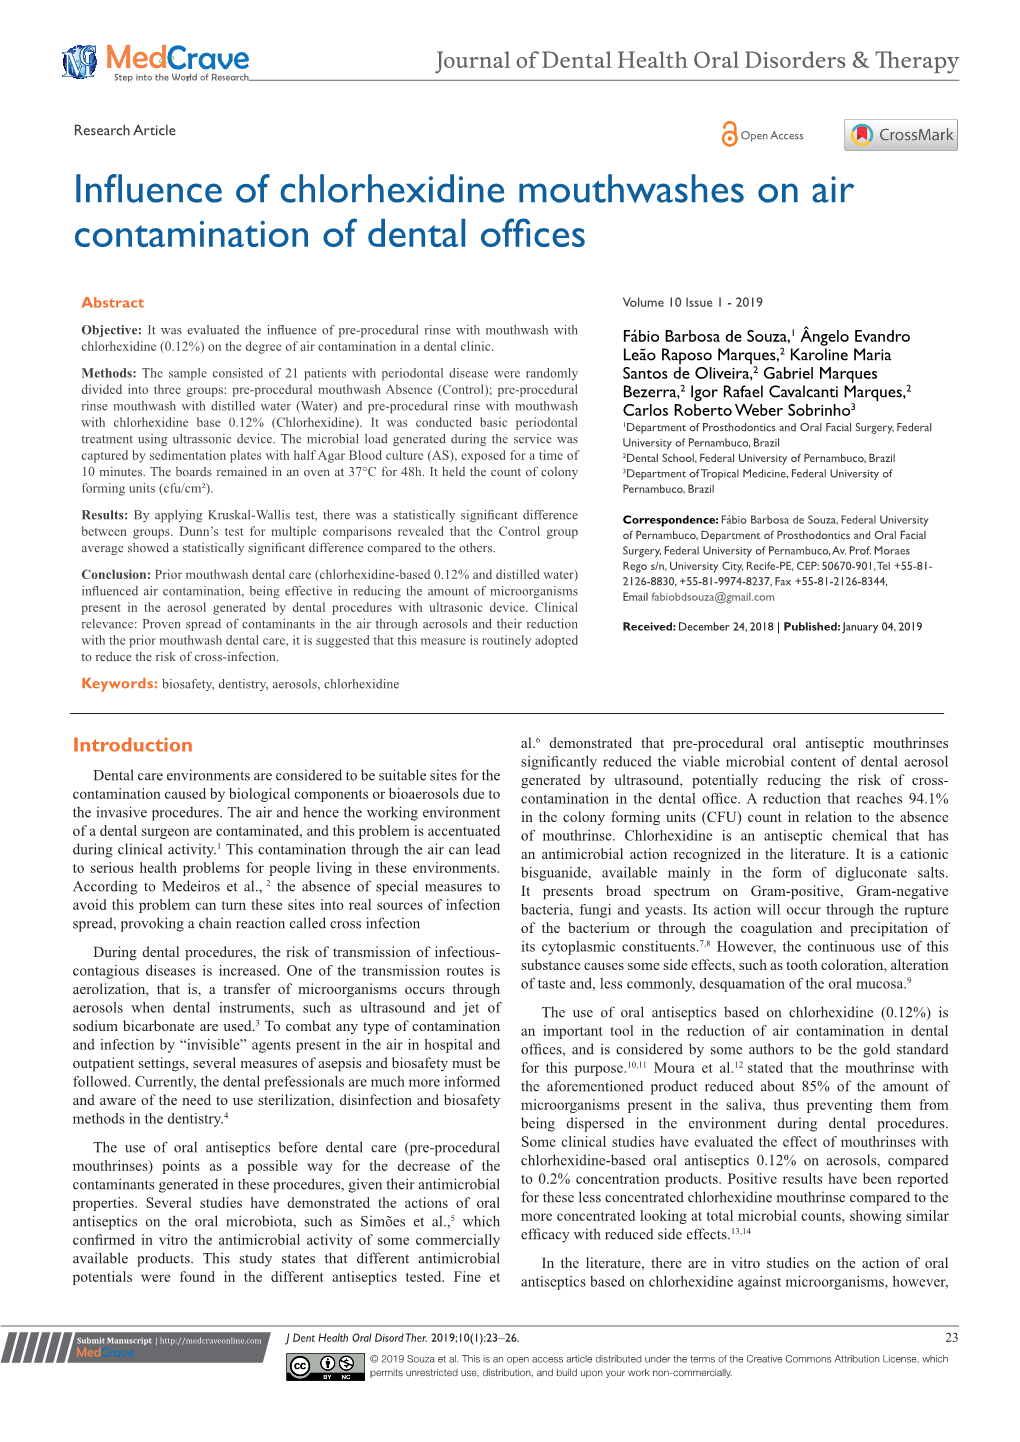 Influence of Chlorhexidine Mouthwashes on Air Contamination of Dental Offices